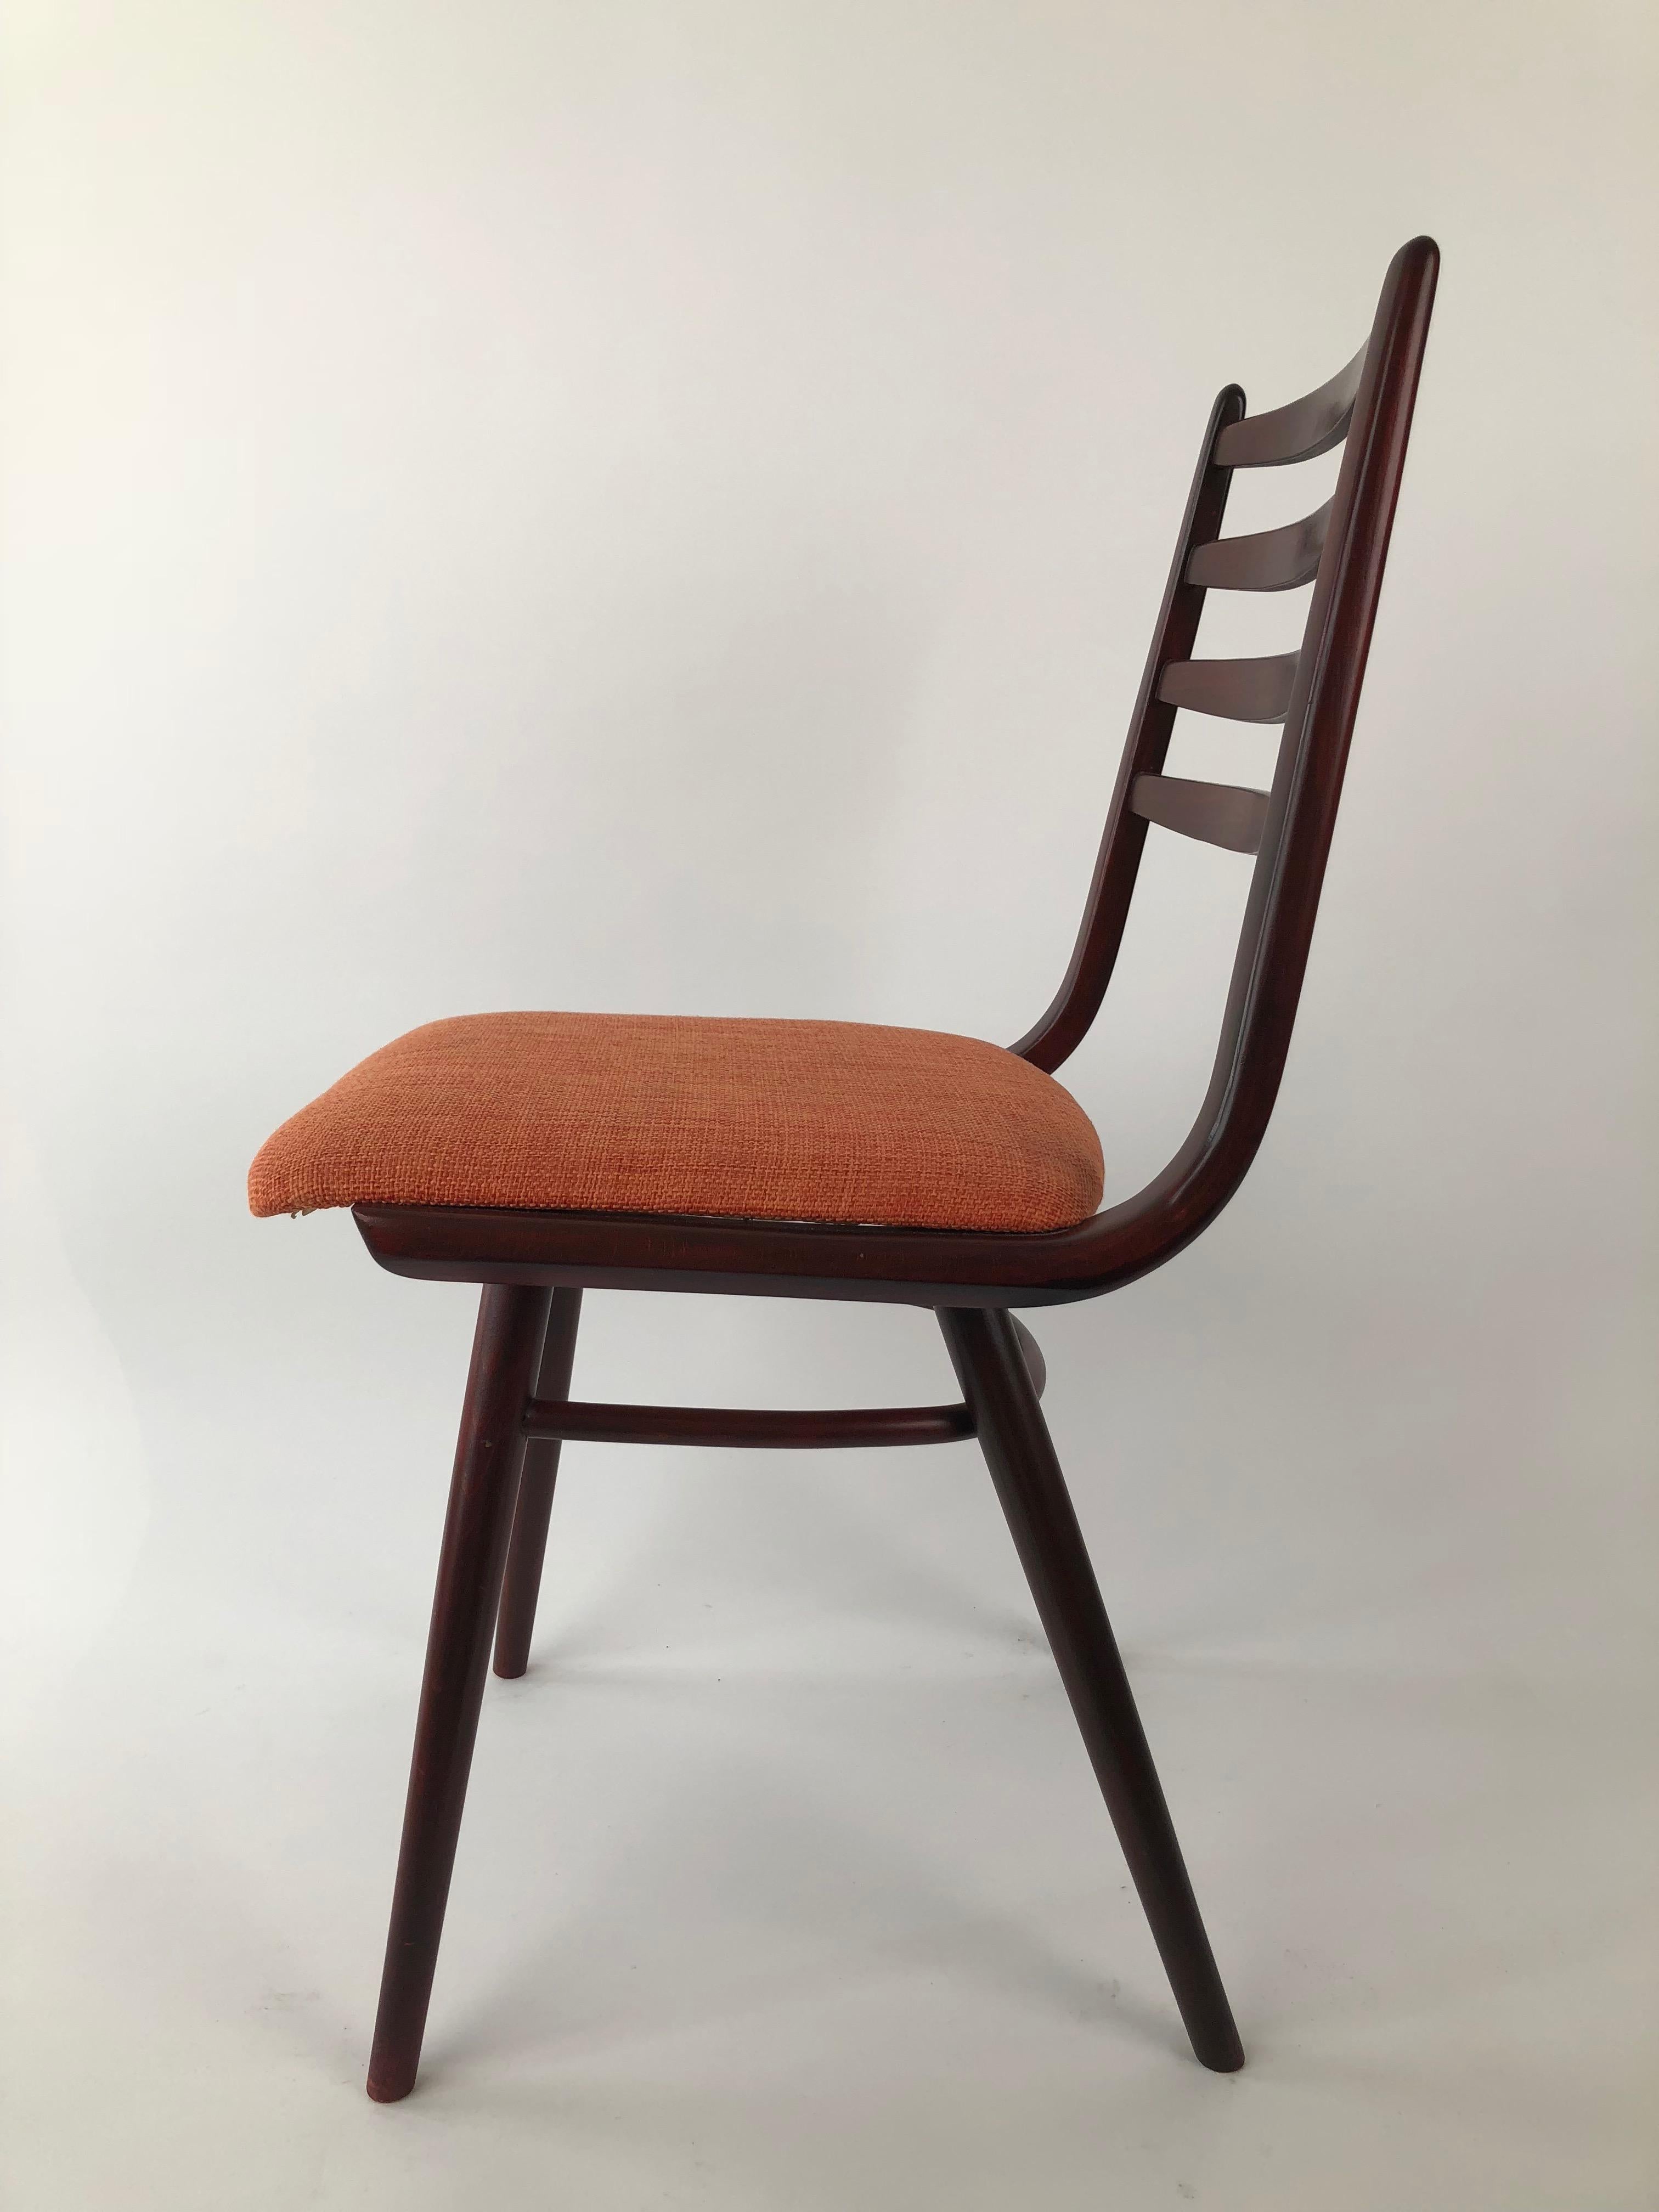 Set of 4 Dinning Chairs, 1970's, Thonet Factory For Sale 1